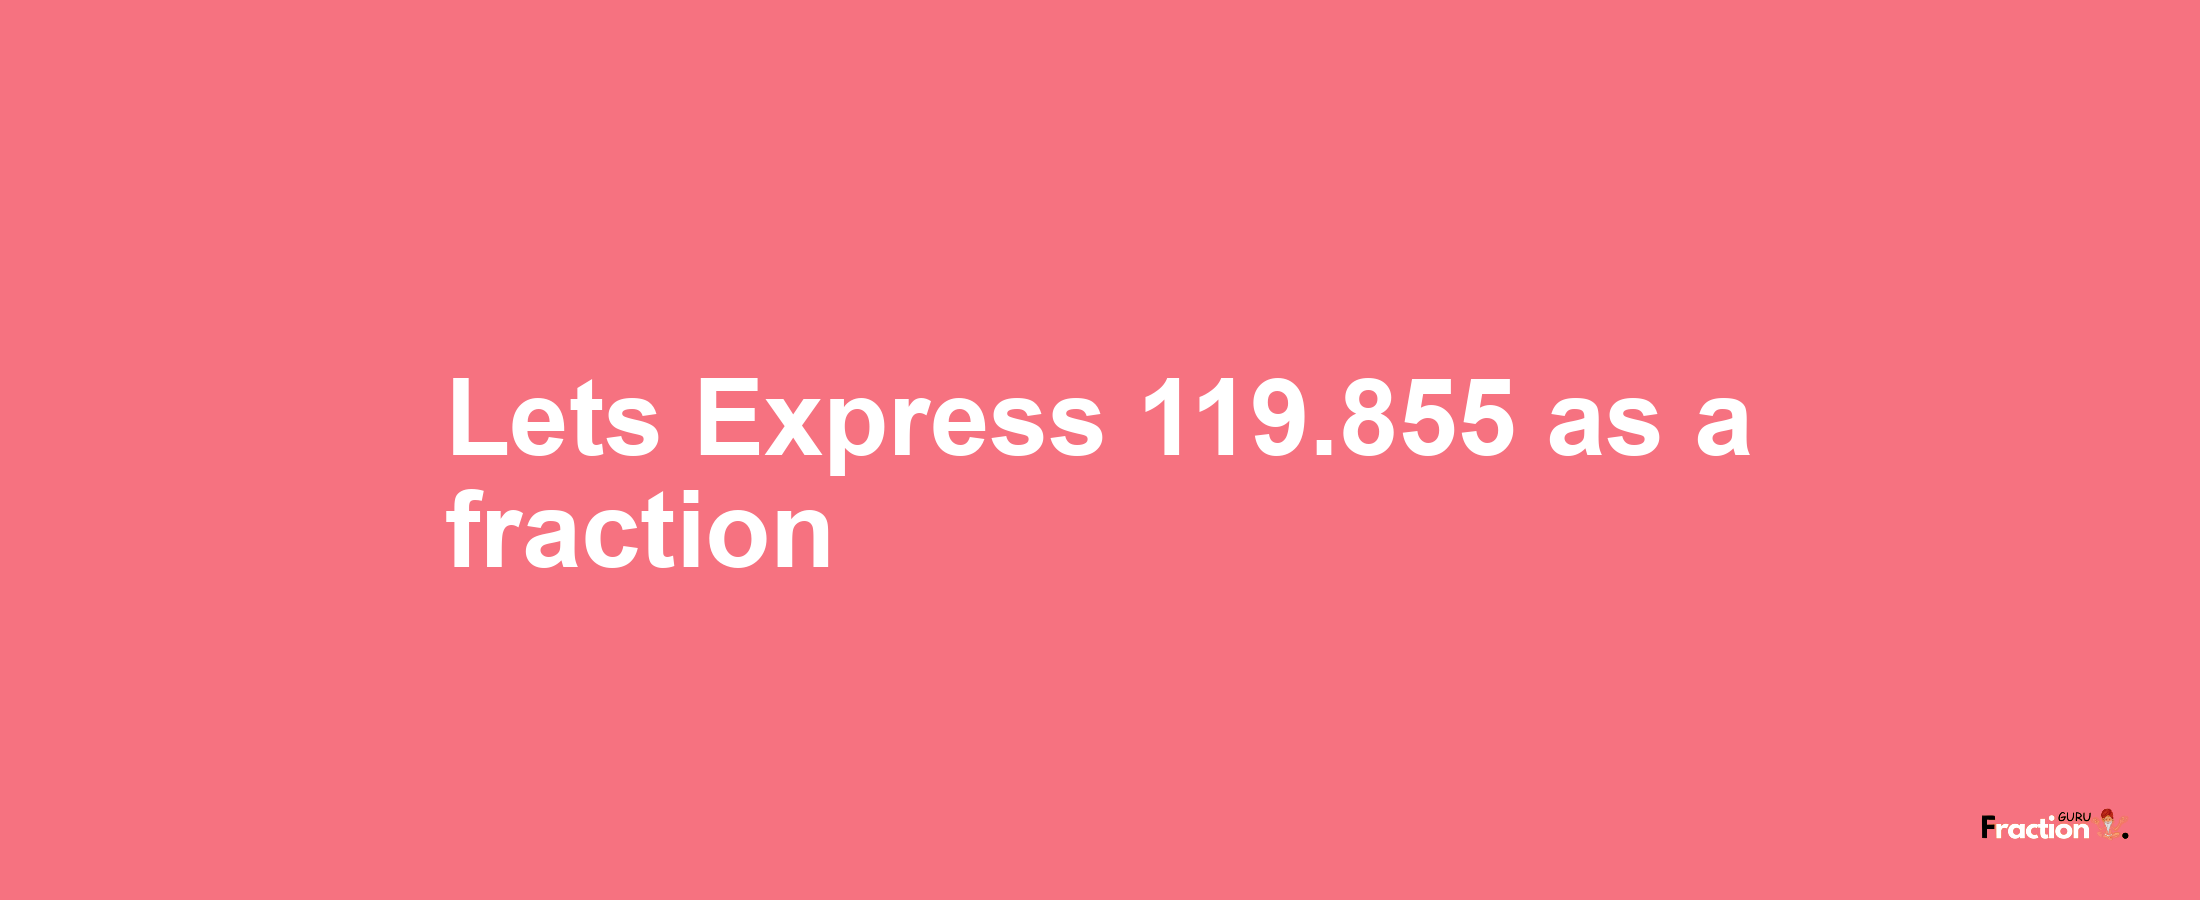 Lets Express 119.855 as afraction